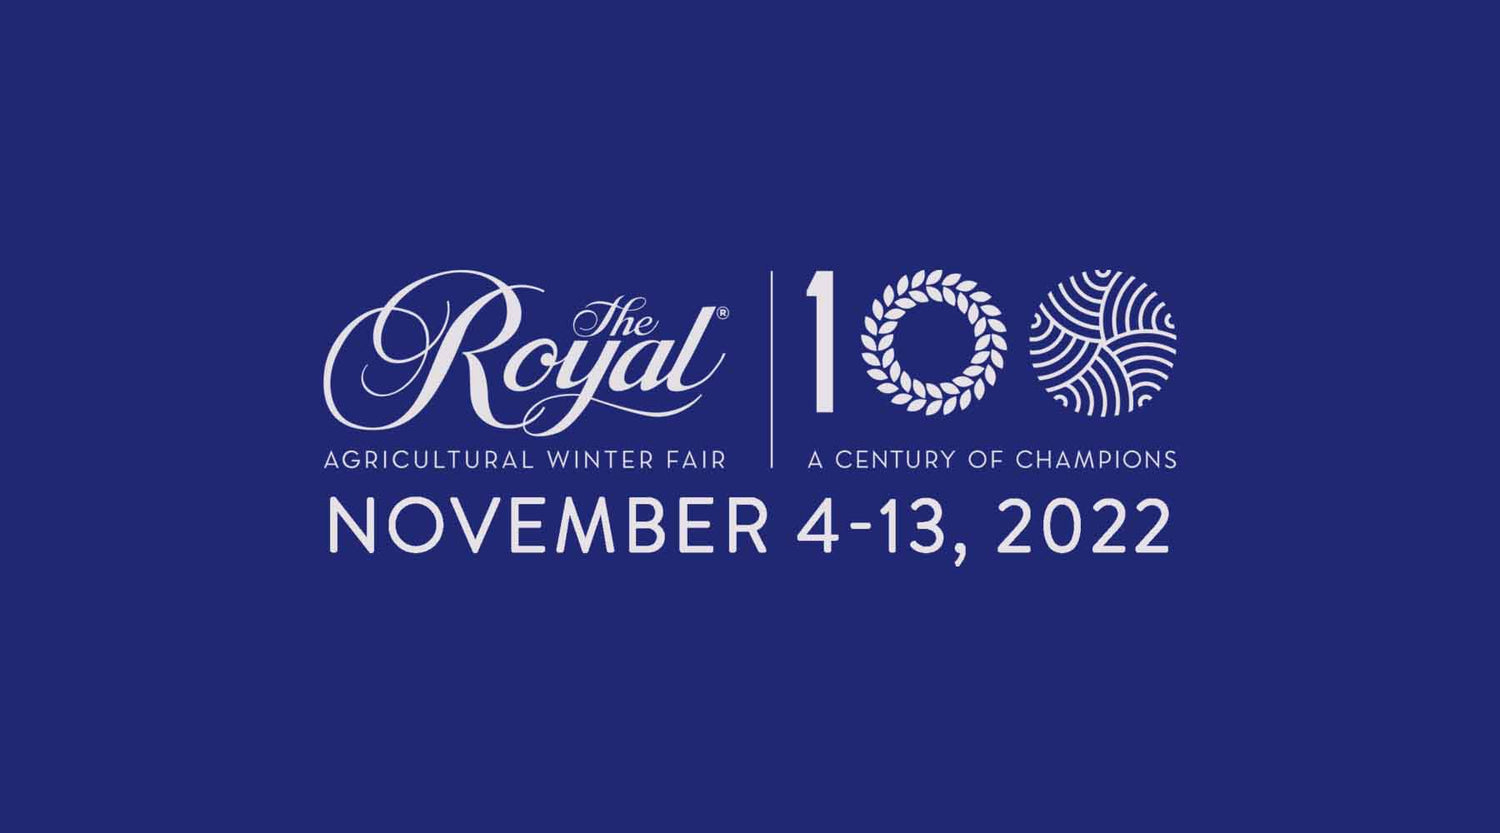 the royal agricultural winter fair - 100 years of champions - November 4-13, 2022